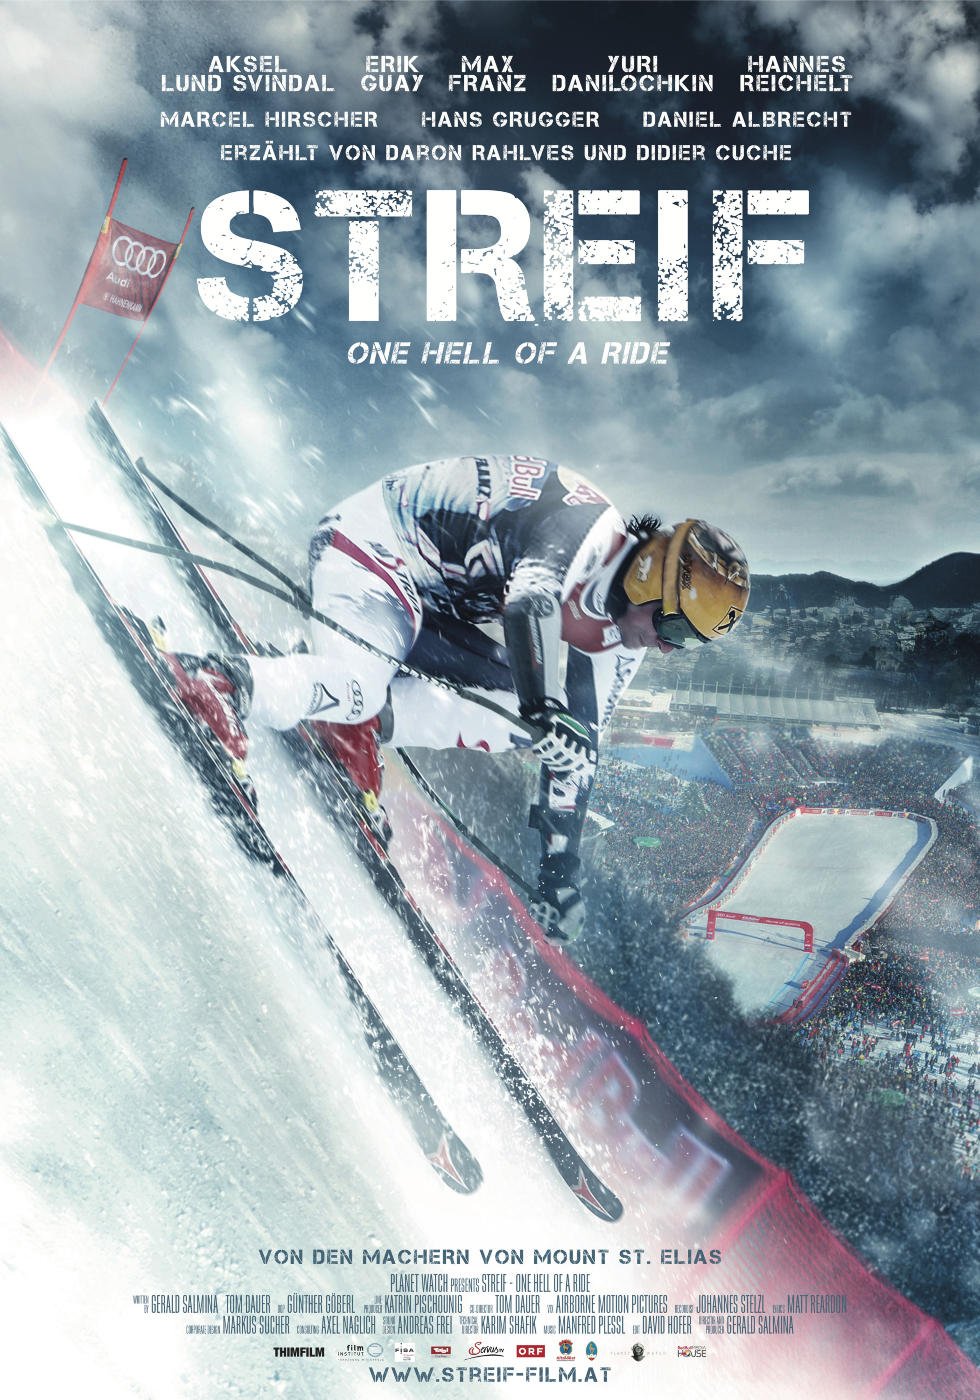 Poster of the movie Streif: One Hell of a Ride